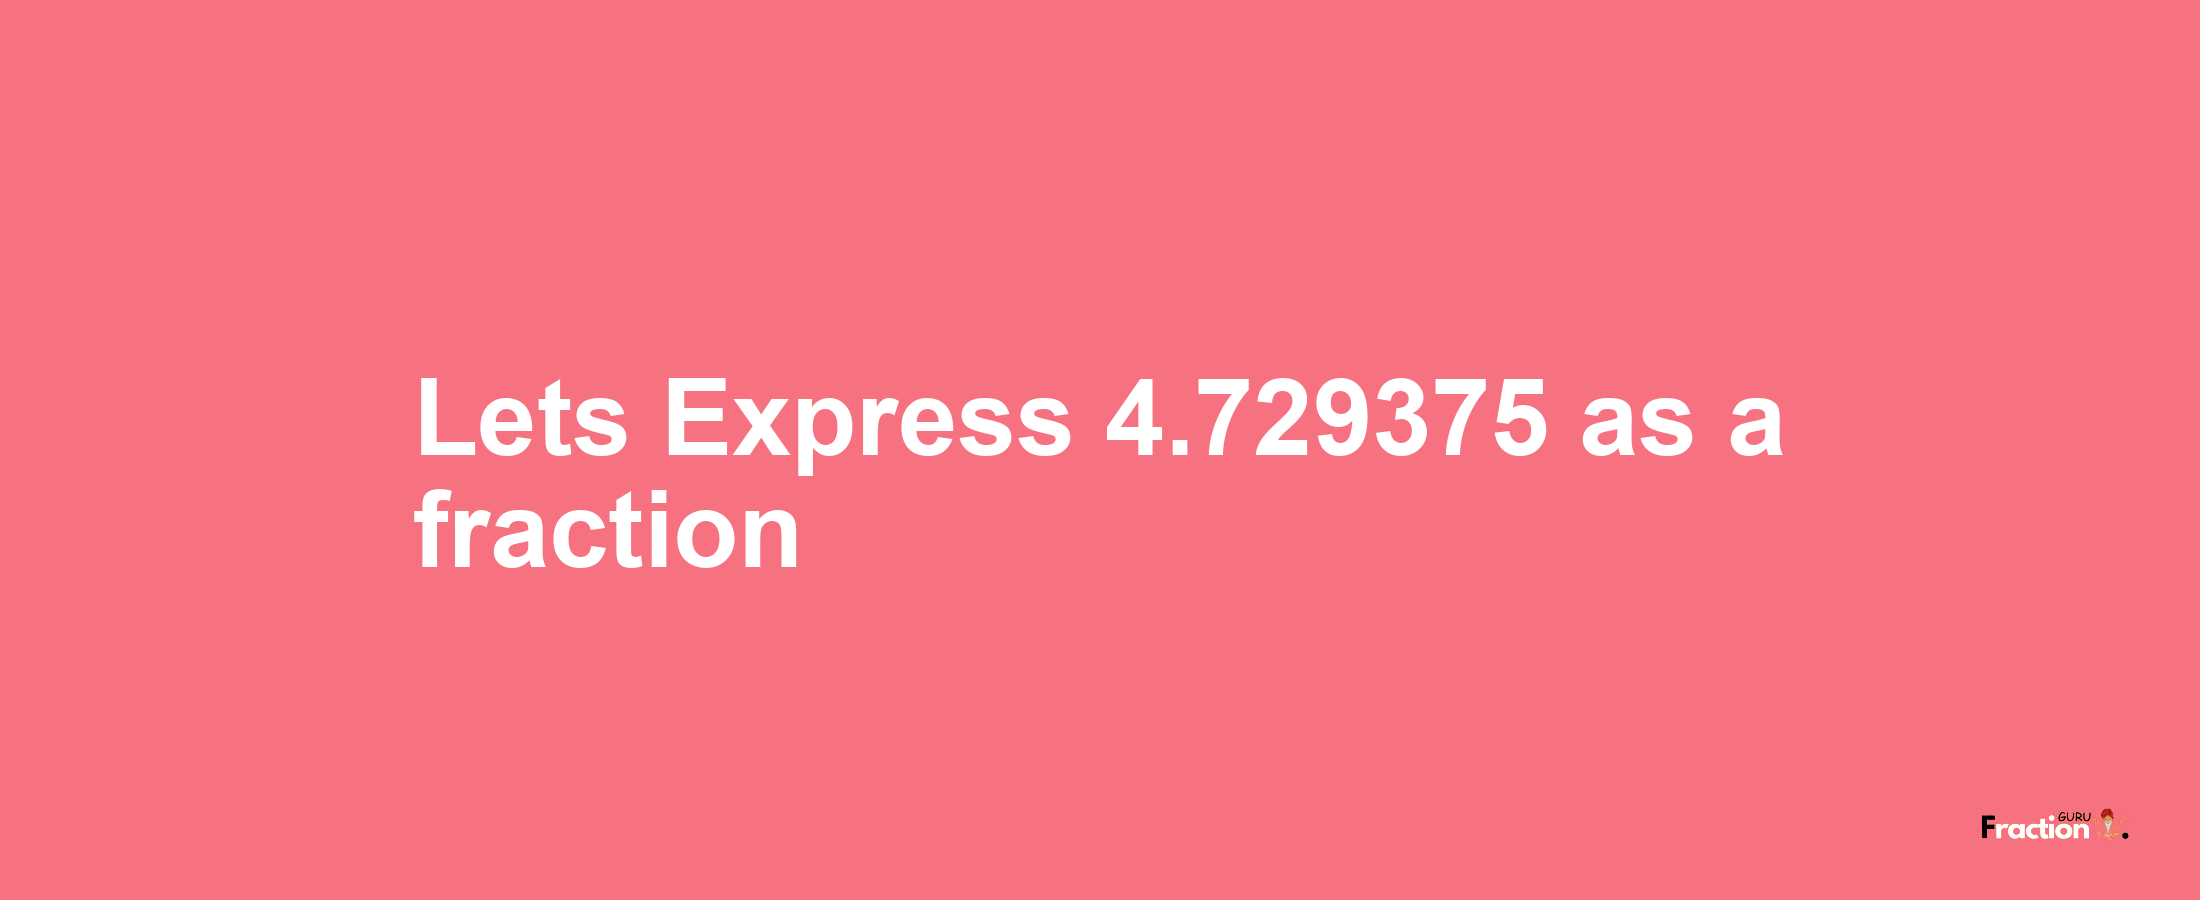 Lets Express 4.729375 as afraction